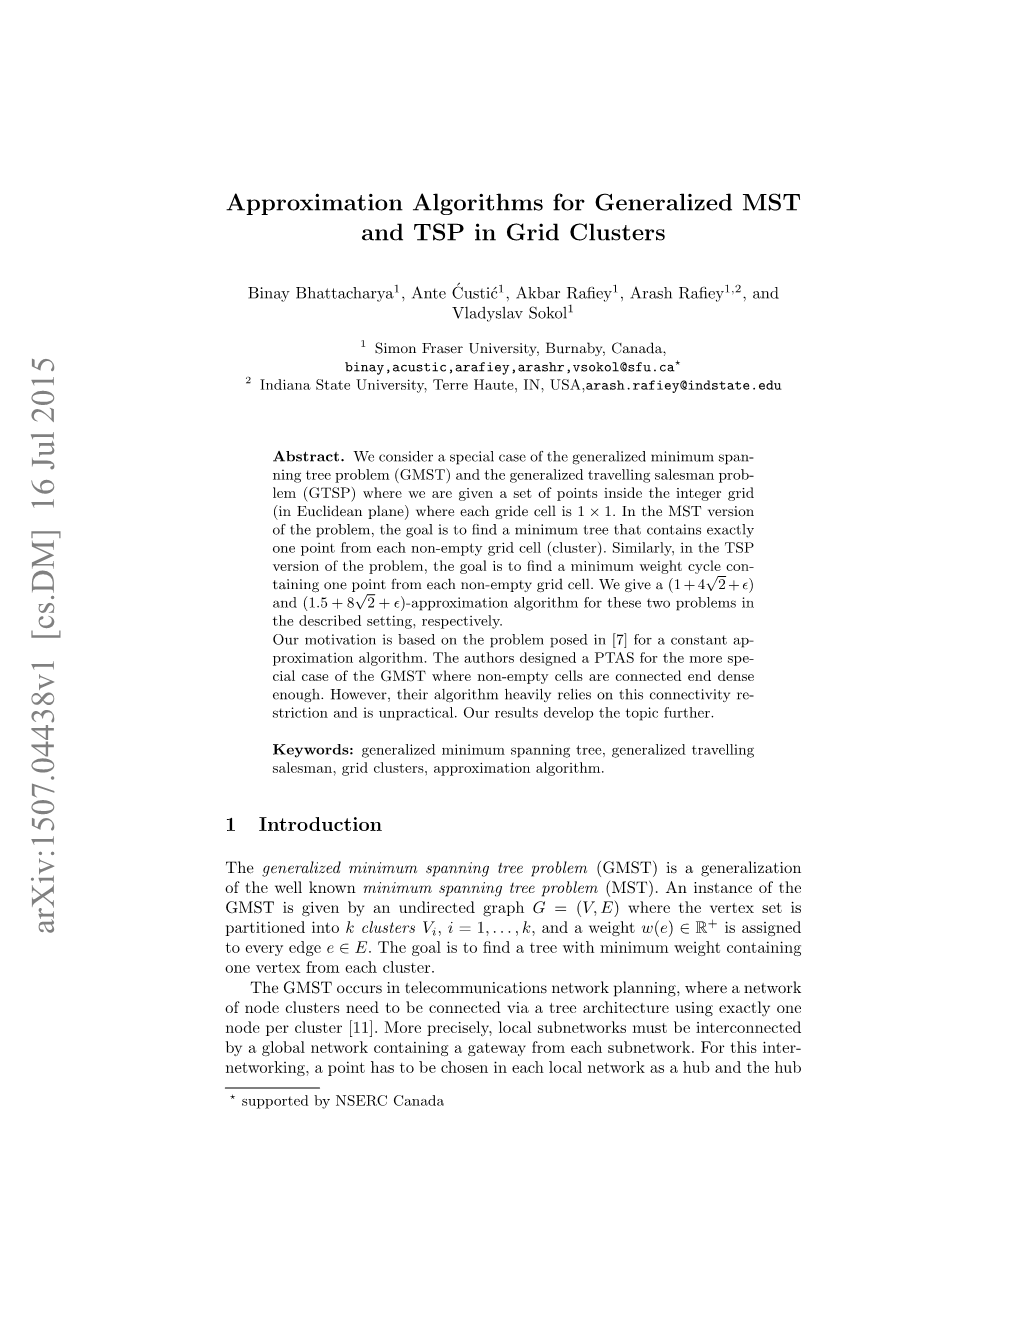 Approximation Algorithms for Generalized MST and TSP in Grid Clusters